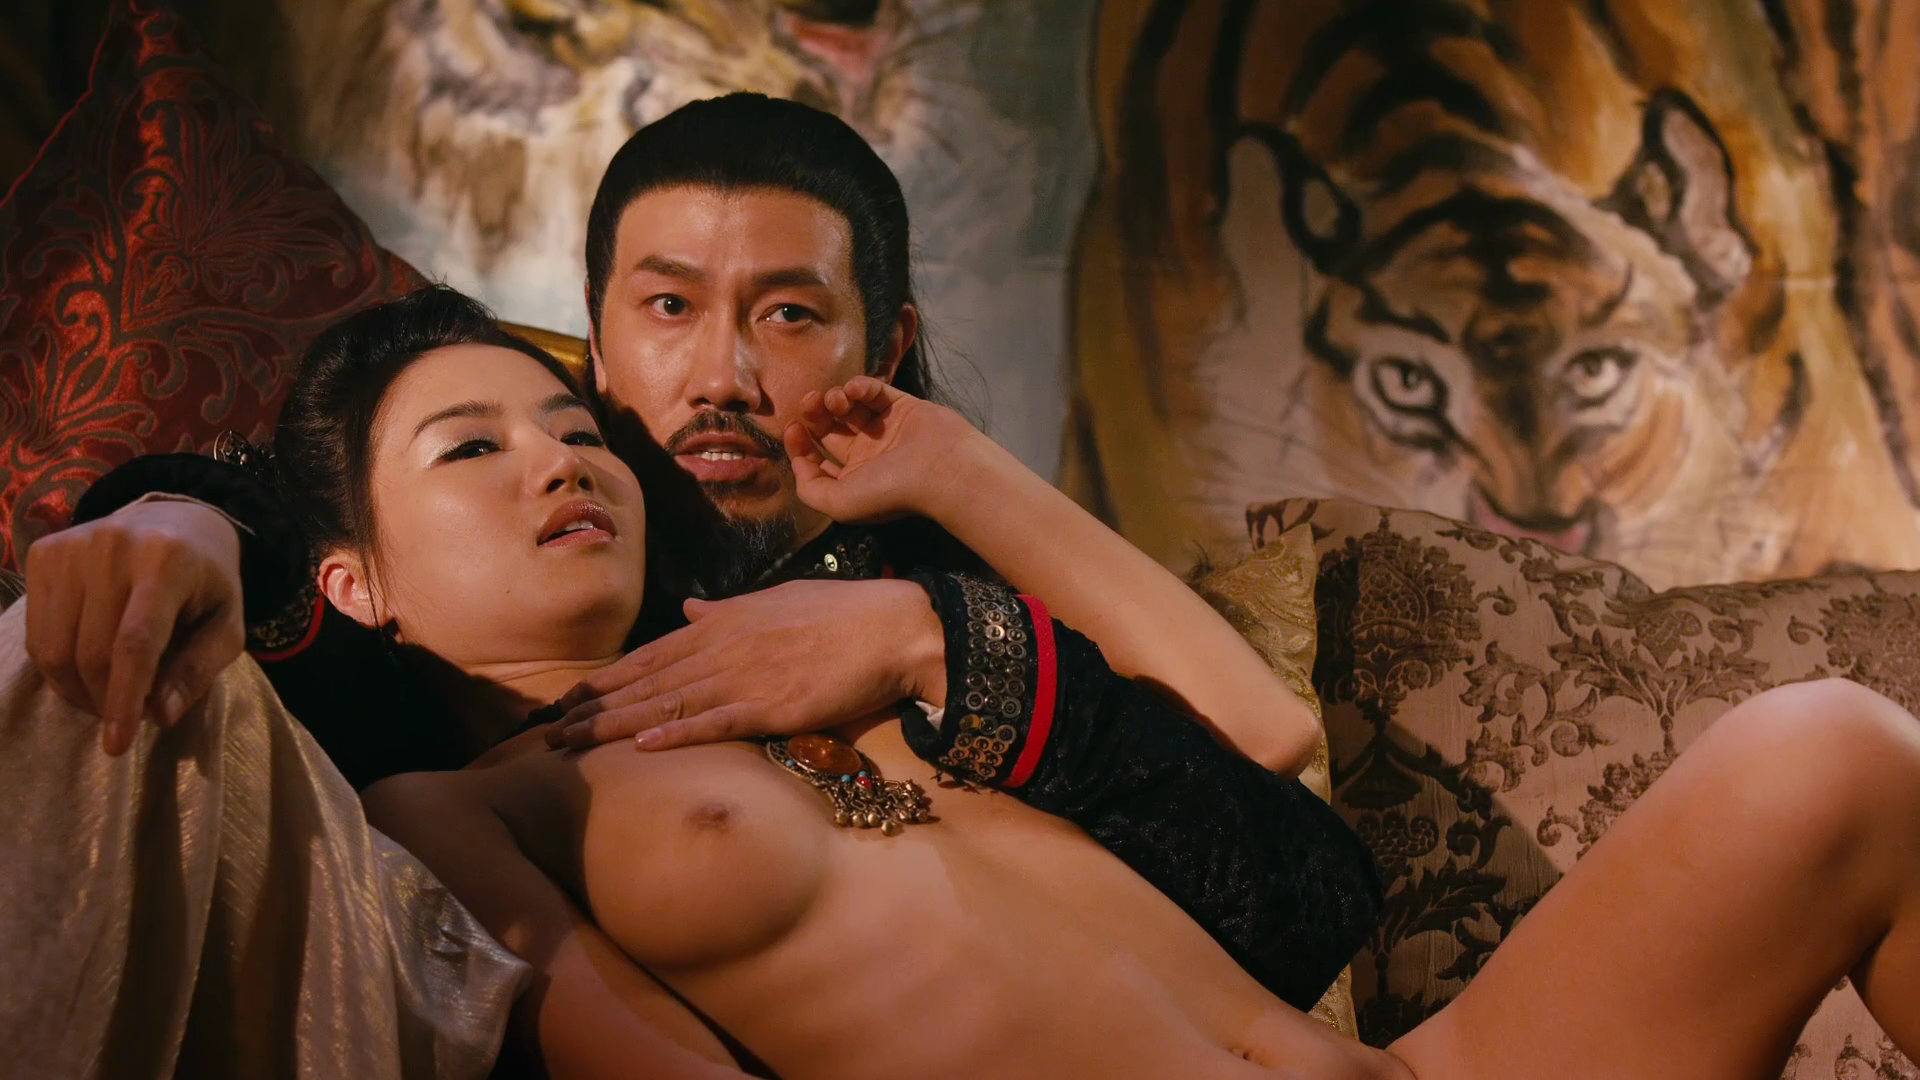 Chinese full movies porn